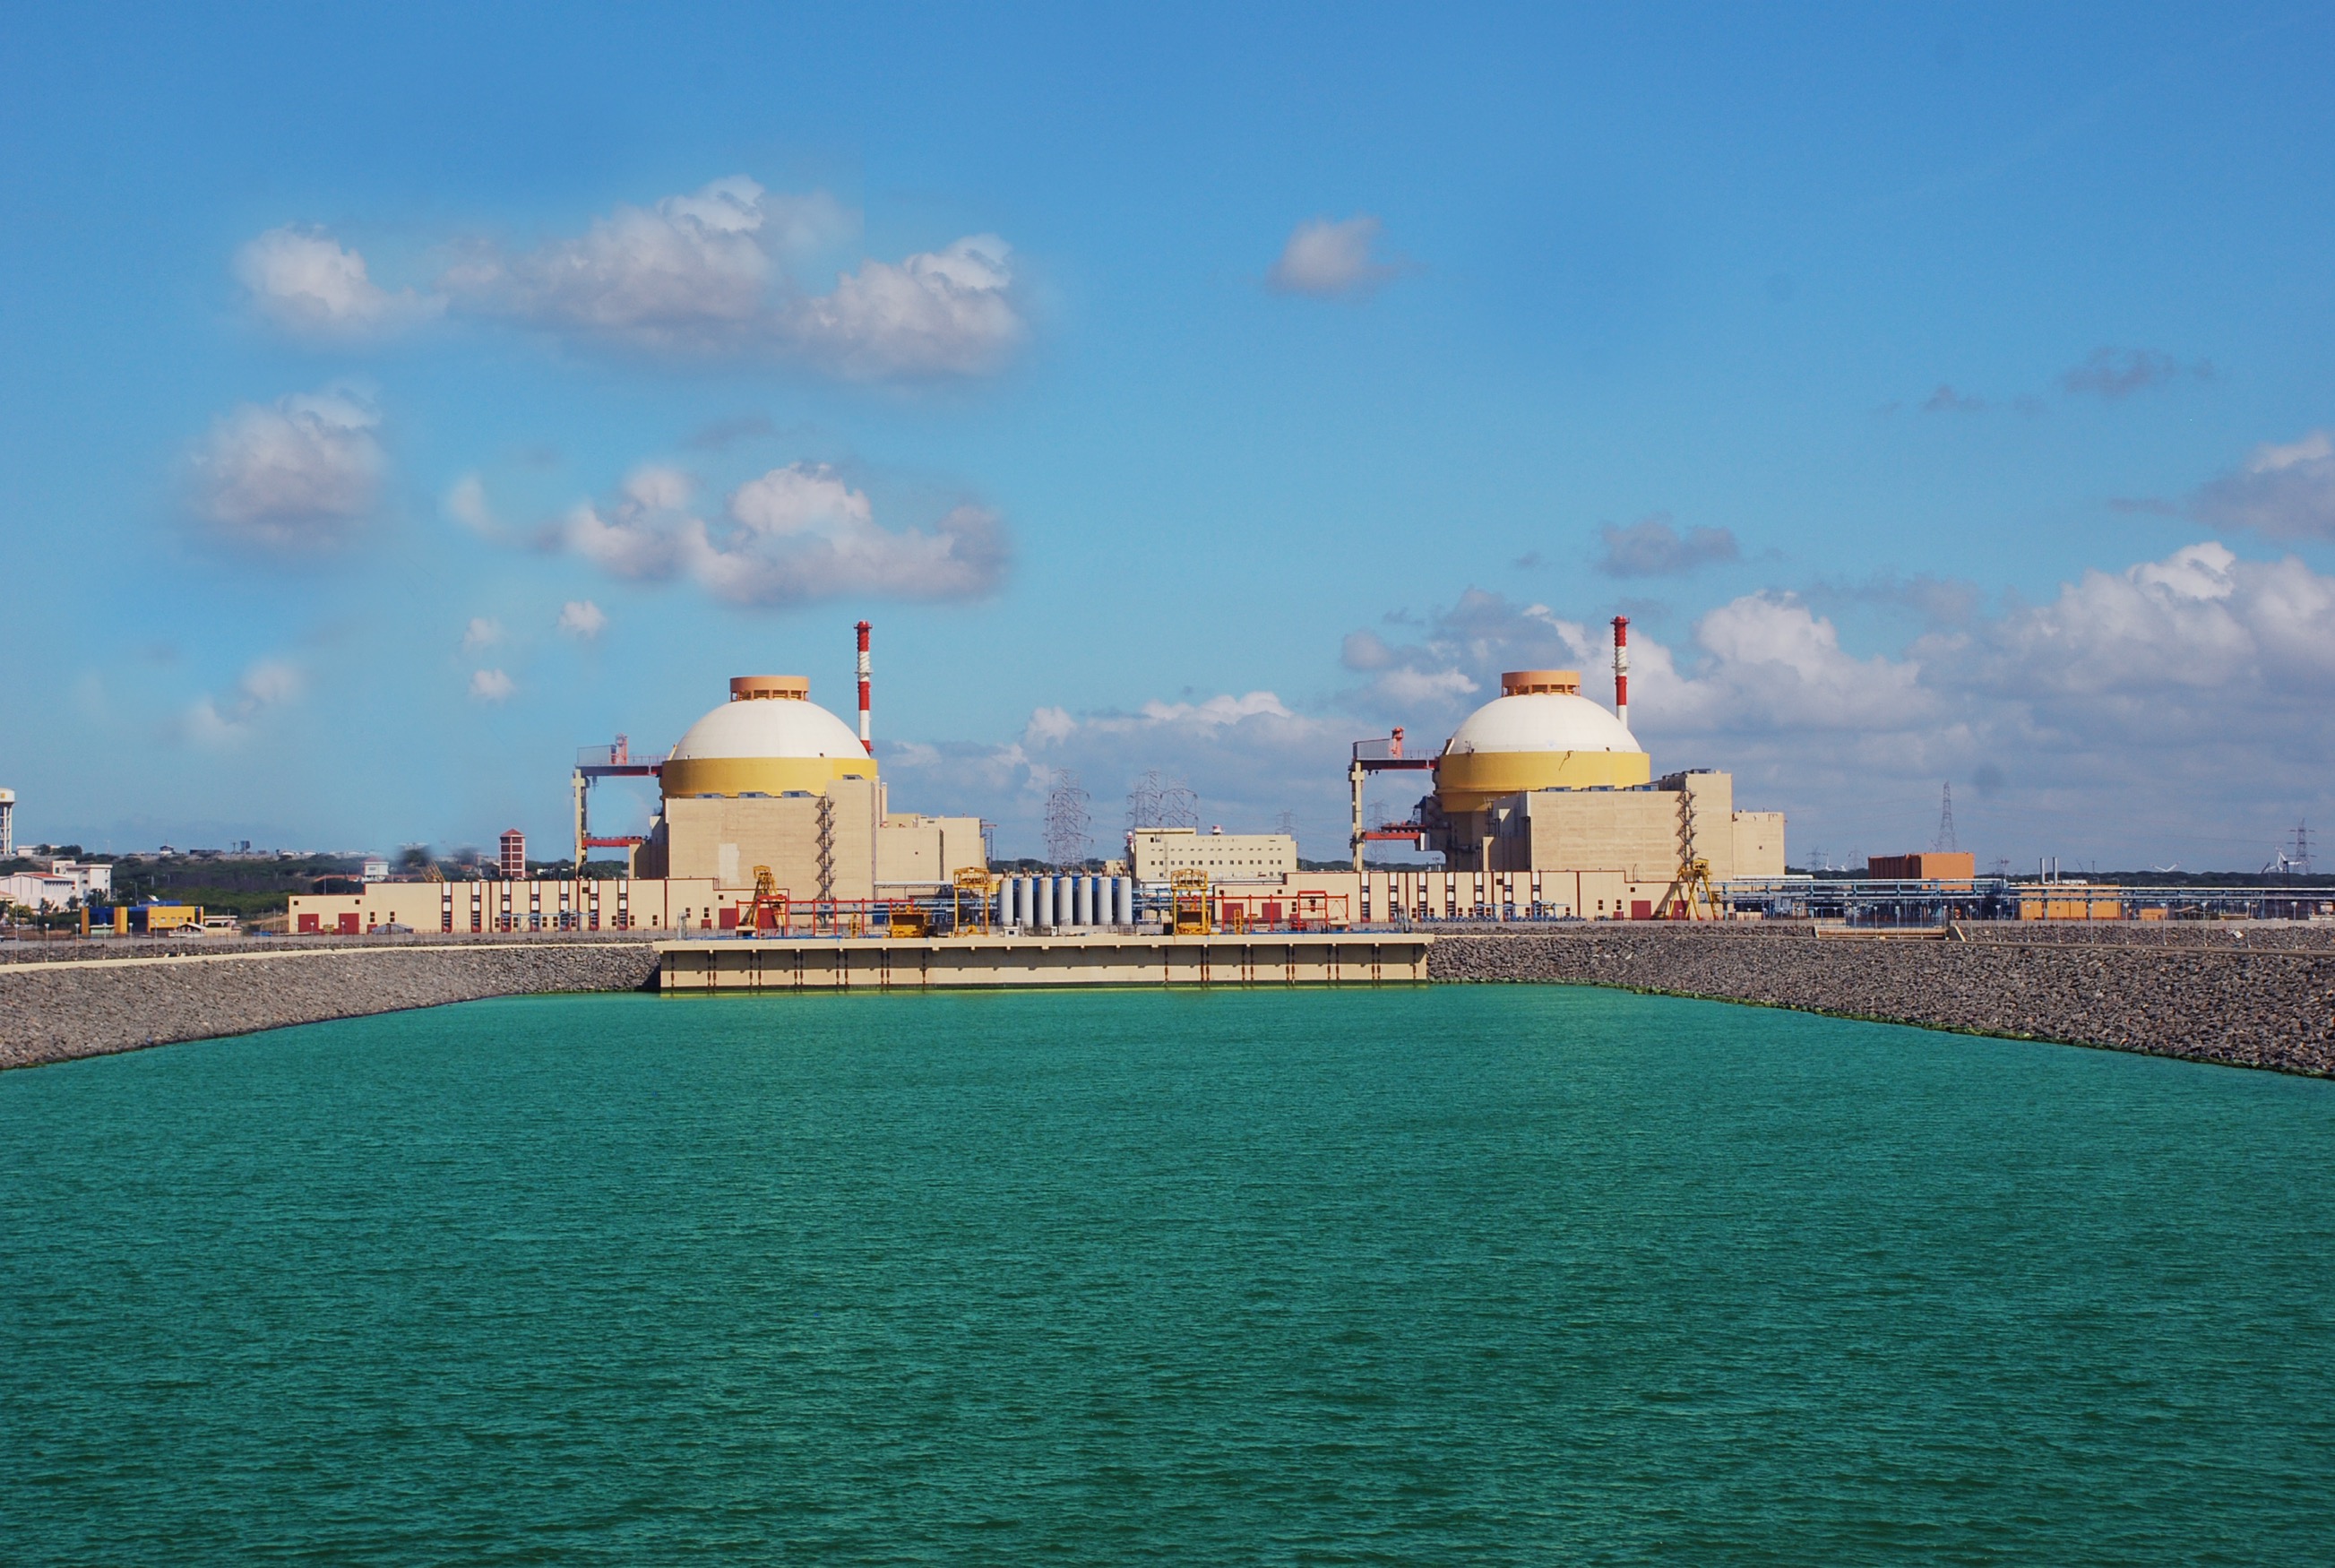 Rosatom supplies the new model of nuclear fuel to India enabling Kudankulam NPP to start operations in longer fuel cycle